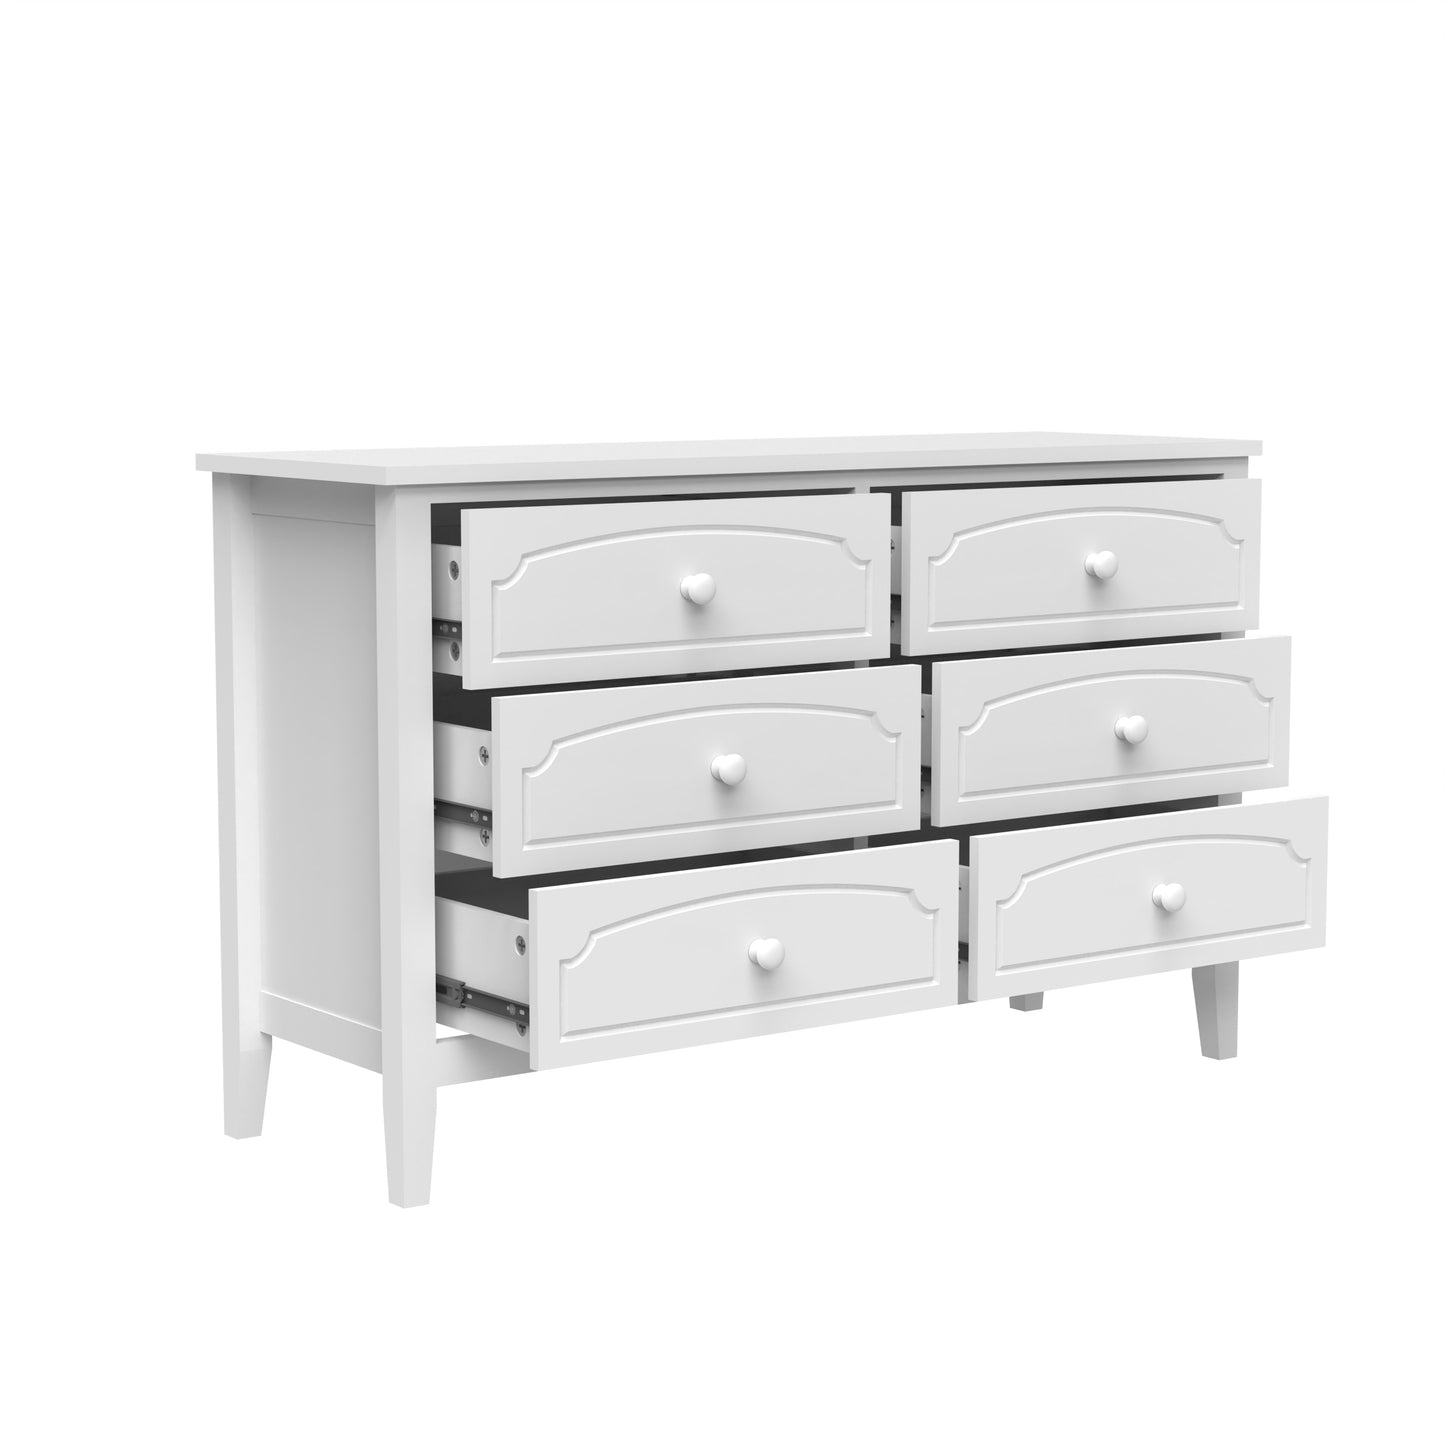 White Contemporary Roman Style, Solid Wood 6 Drawers Dresser Cabinet, Vanity Desk, Makeup Table With Drawers, Living Room Buffet, Storage Organizer Cabinet, Big Dresser. Paint Sprayed Finishing